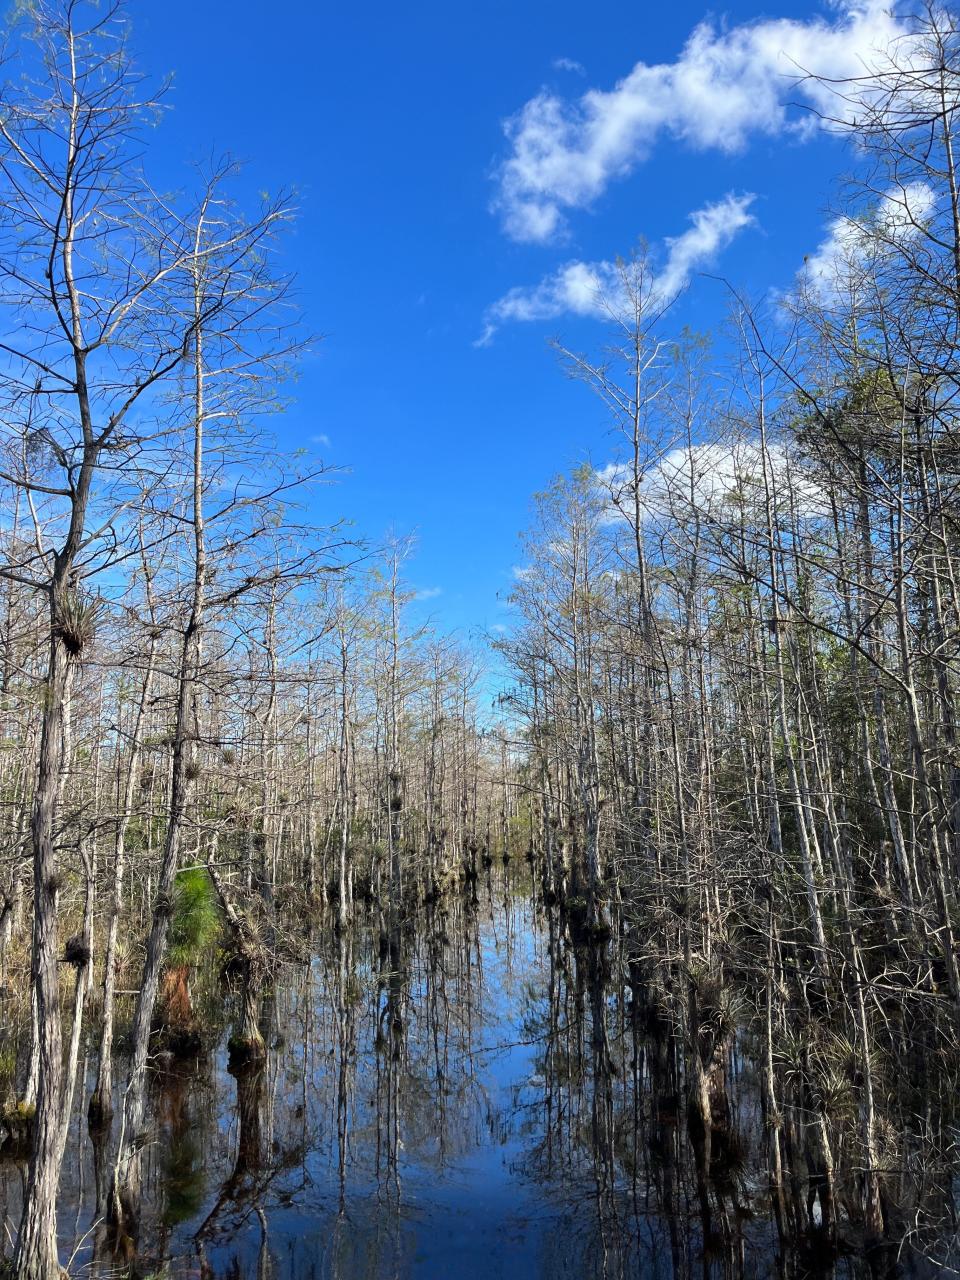 A FWC virtual scavenger hunt leads players to visit Florida’s Wildlife Management Areas.